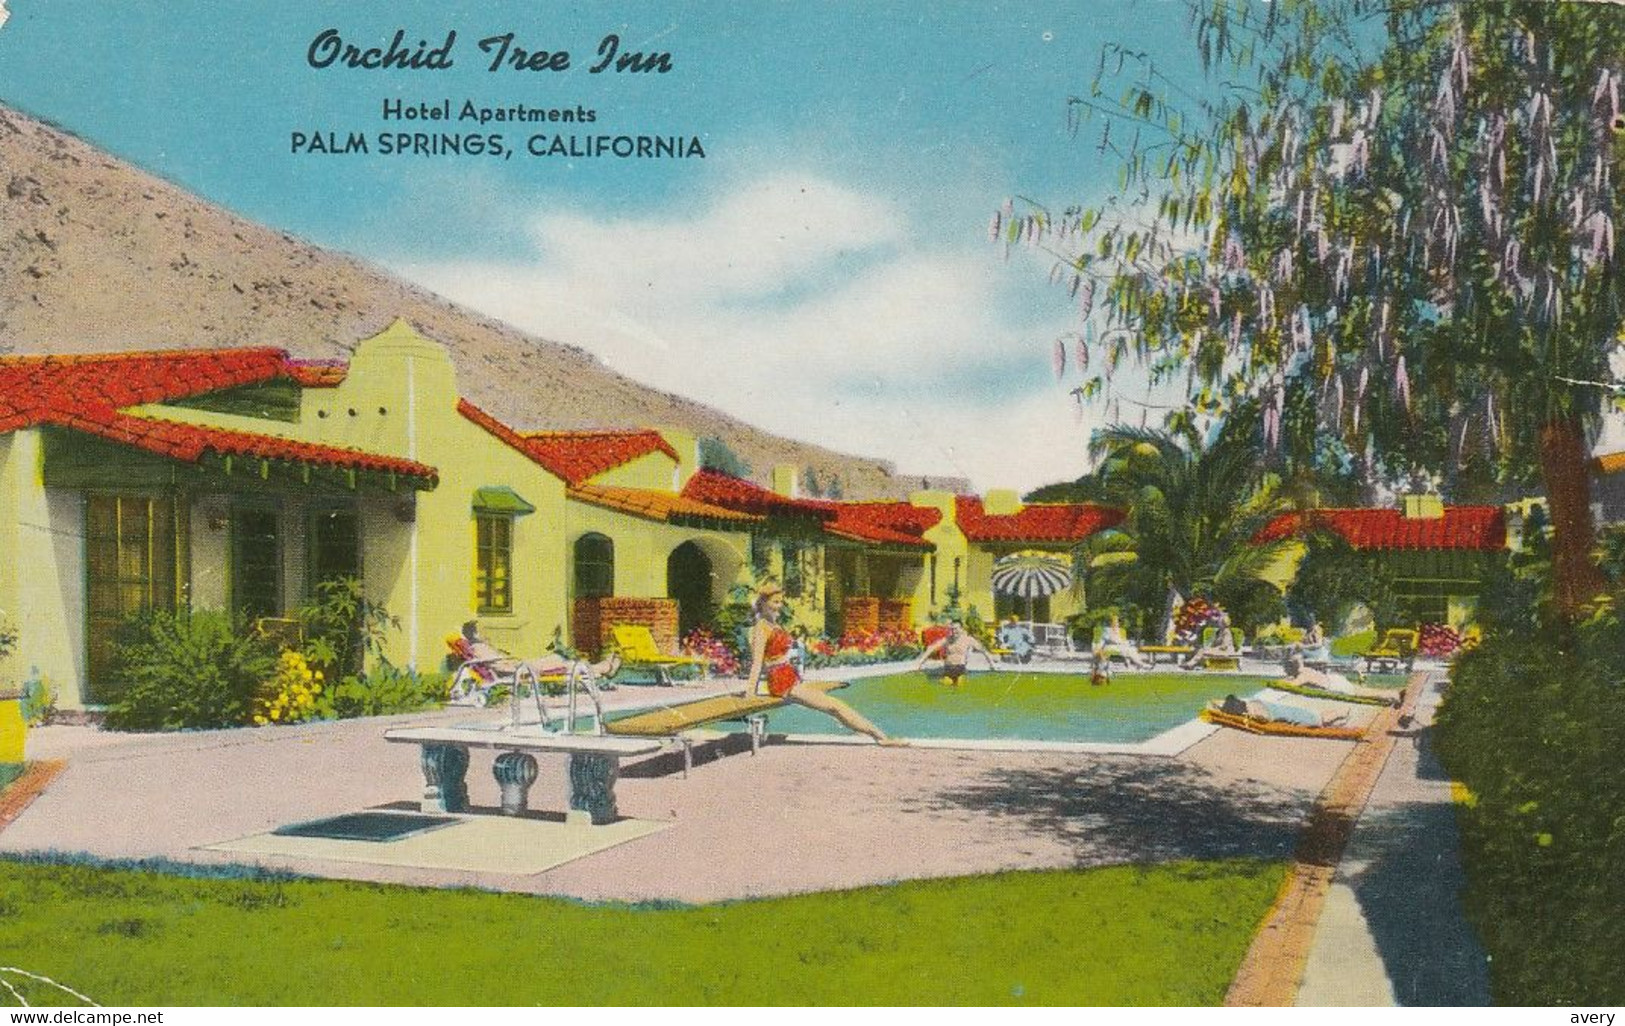 Orchid Tree Inn, 226 West Baristo Road, Palm Springs, California  Hotel Apartments - Palm Springs